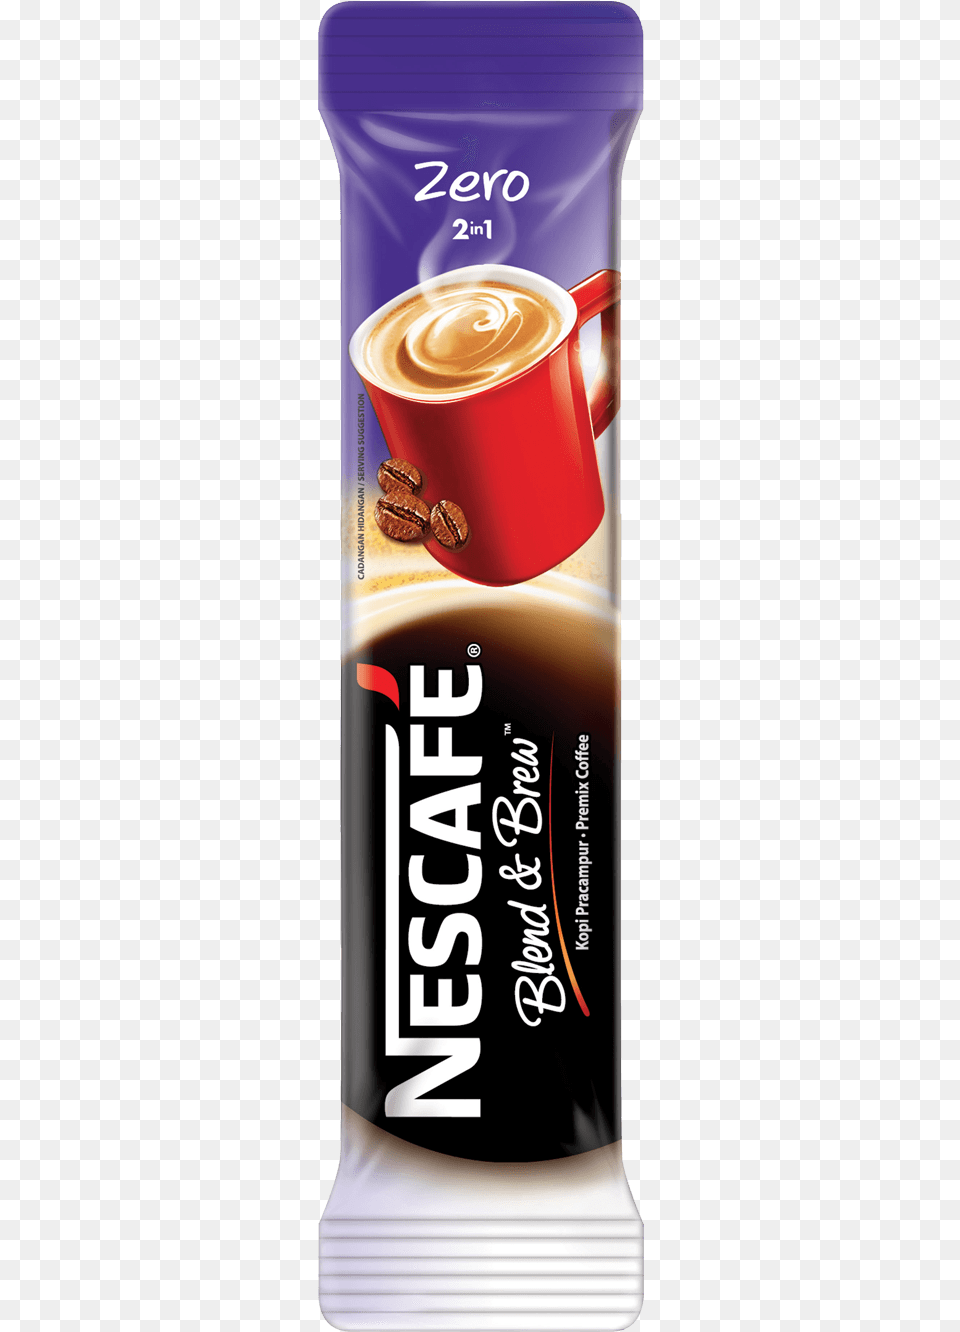 Nescafe Malaysia Blend Amp Brew Coffee With Milk Nescafe 3 In 1 Blend Amp Brew Rich Premix Coffee, Cup, Beverage, Coffee Cup, Latte Free Png Download